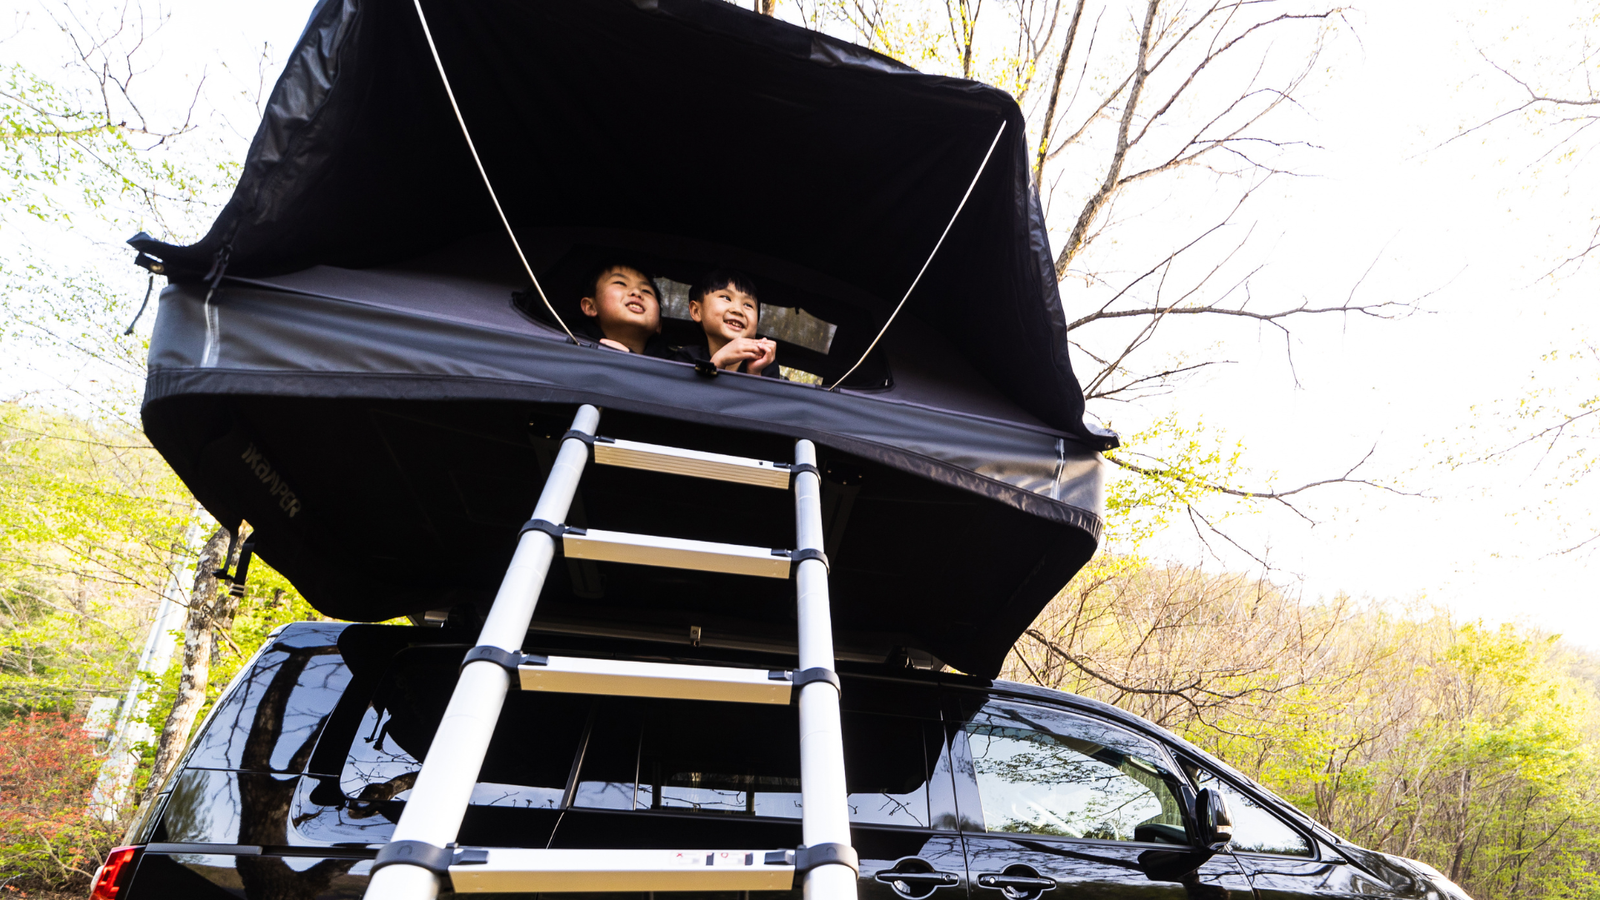 What vehicles can support a roof top tent